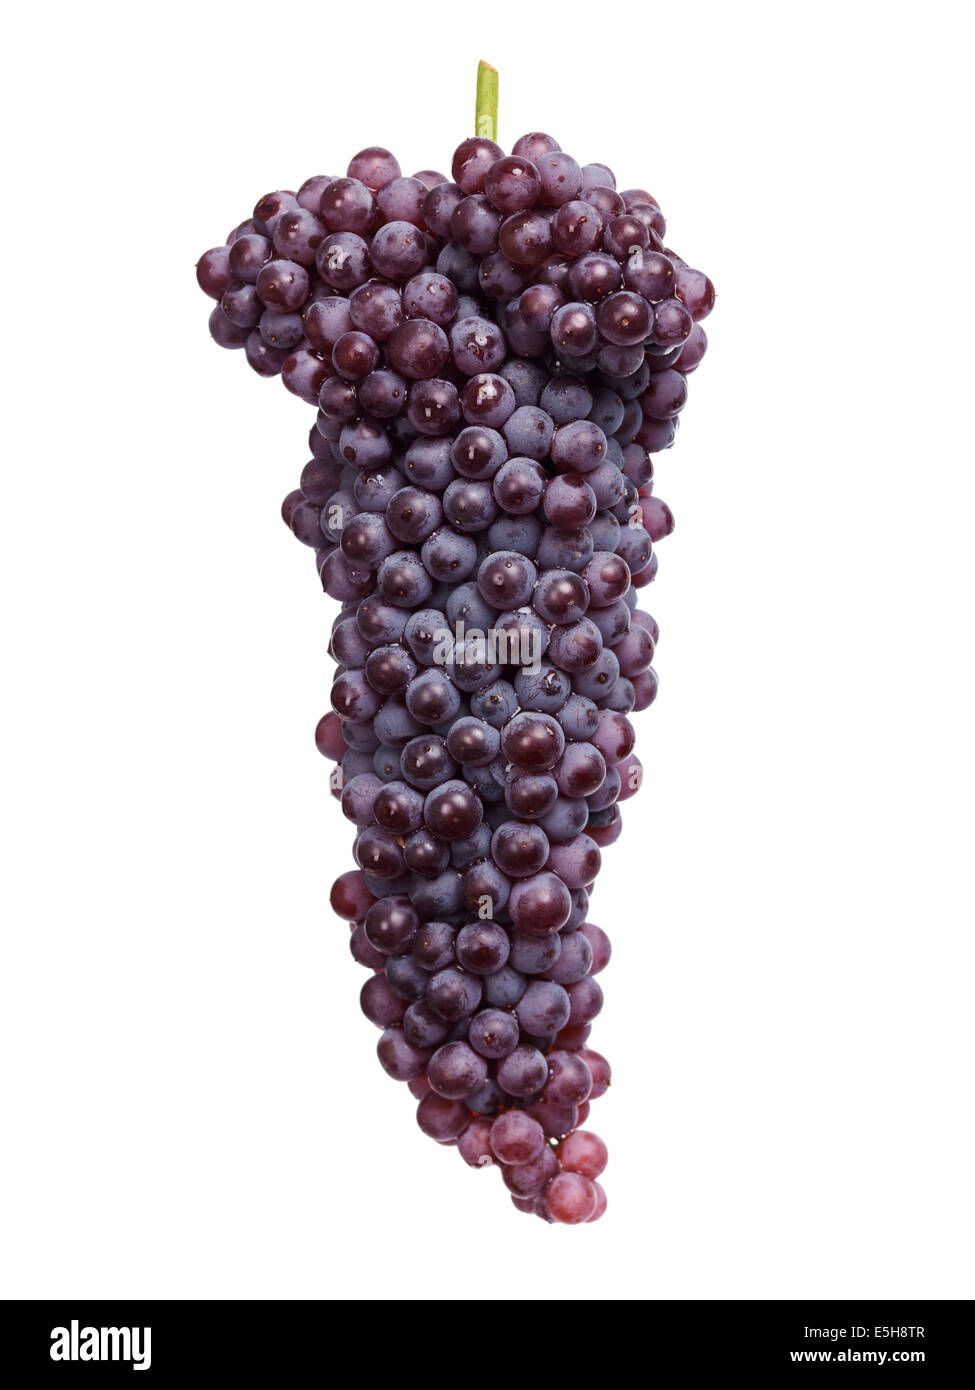 Black Corinth grapes, Champagne grapes isolated on white background. Stock Photo